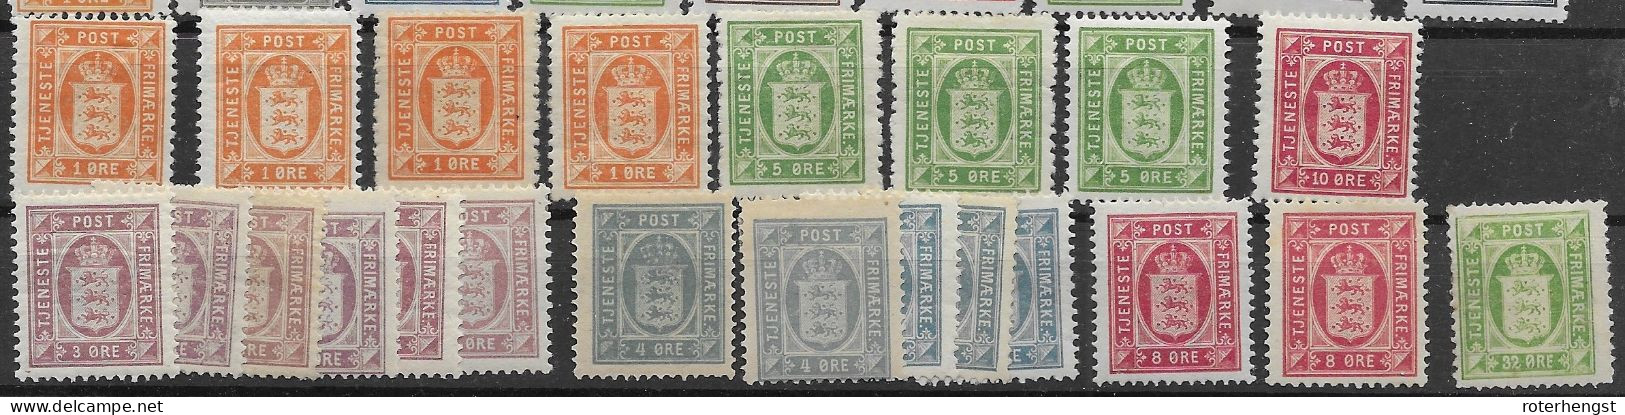 Denmark Officials Collection Mh* Some Are Mnh ** Different Perfs Wtm And Shades Over 200 Euros - Oficiales